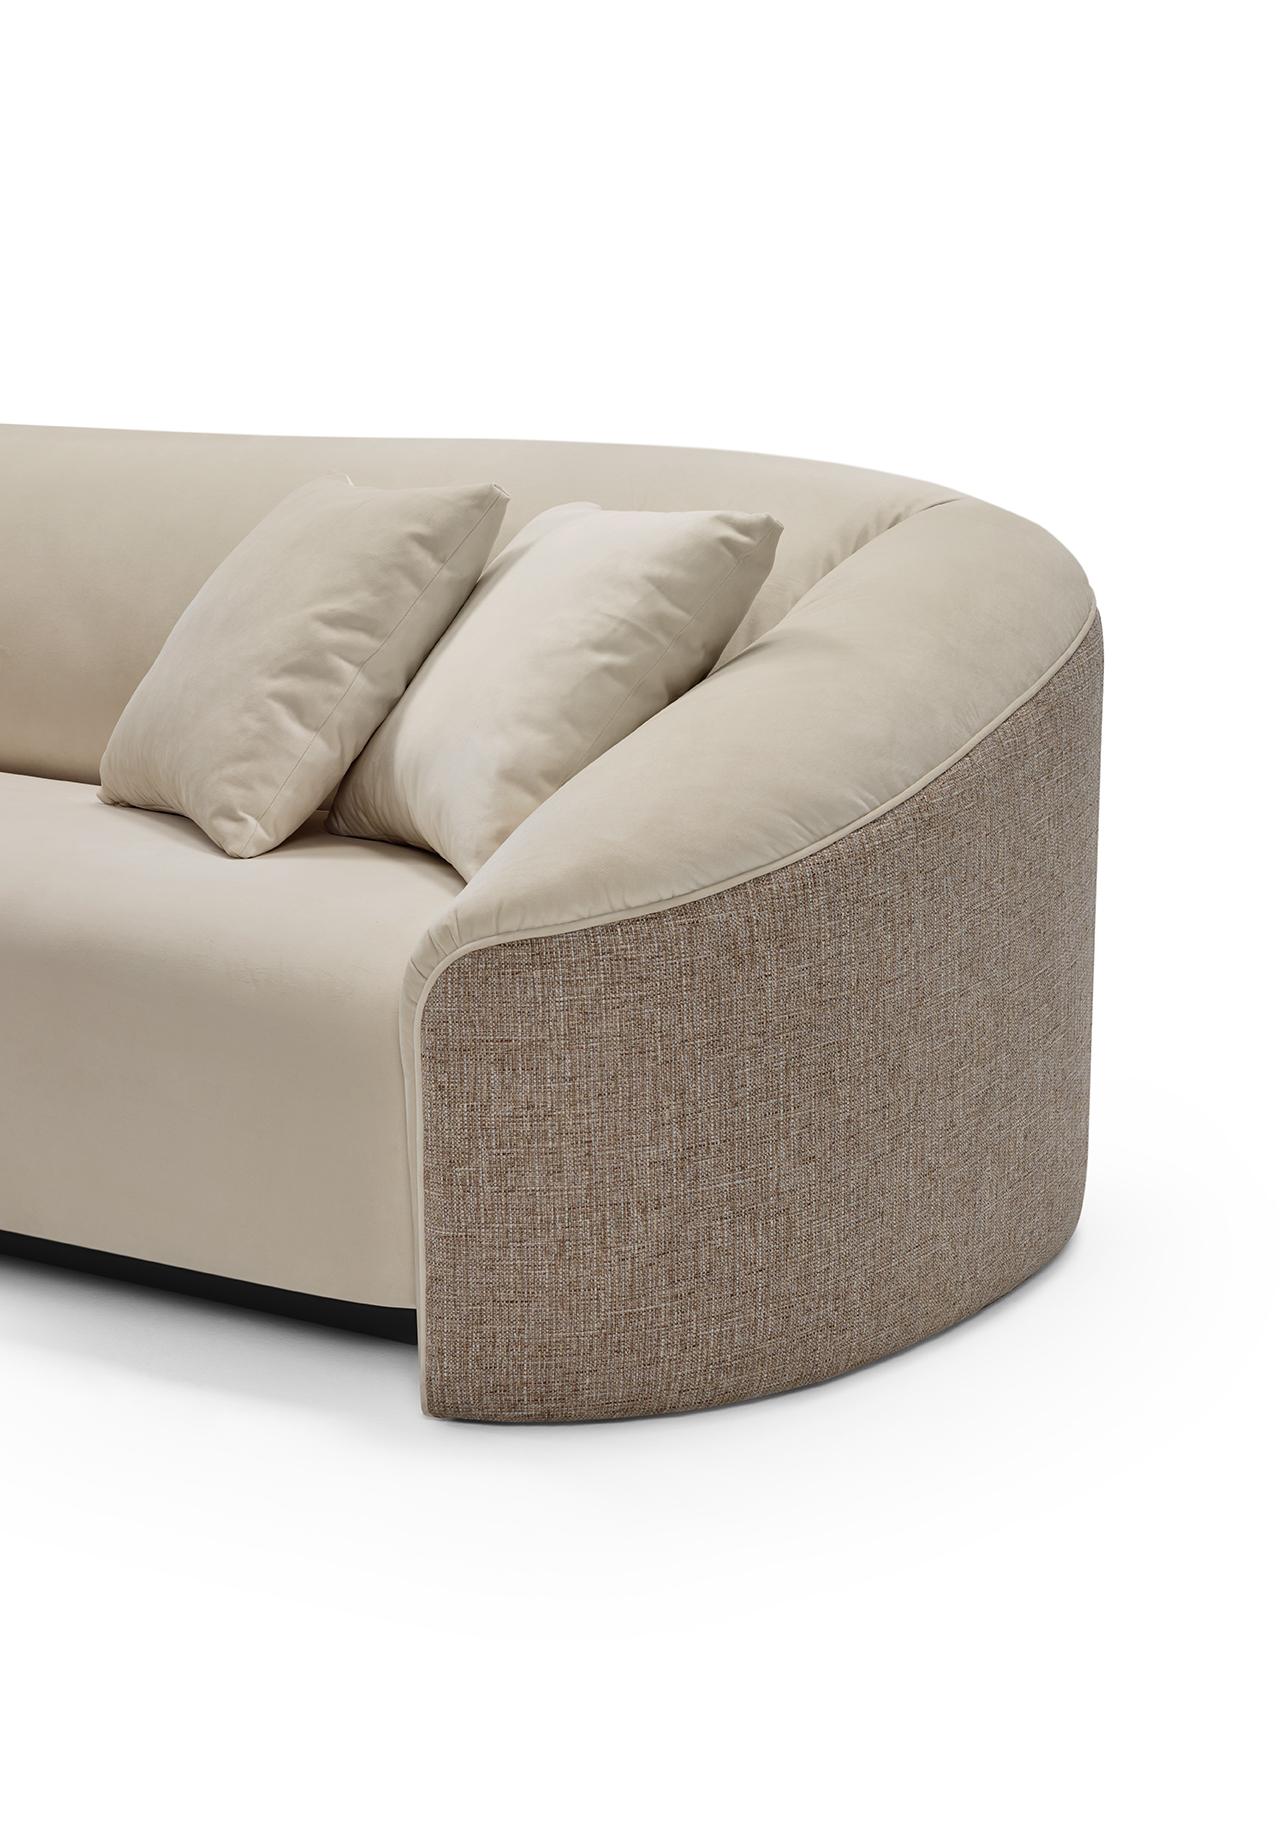 The curved DEAN sofa was designed to provide a superior comfort feeling. The enveloping structure and the balanced combination of feathers and memory foam will embrace you on a moment of trully relaxation. Dean is available to order with a matching